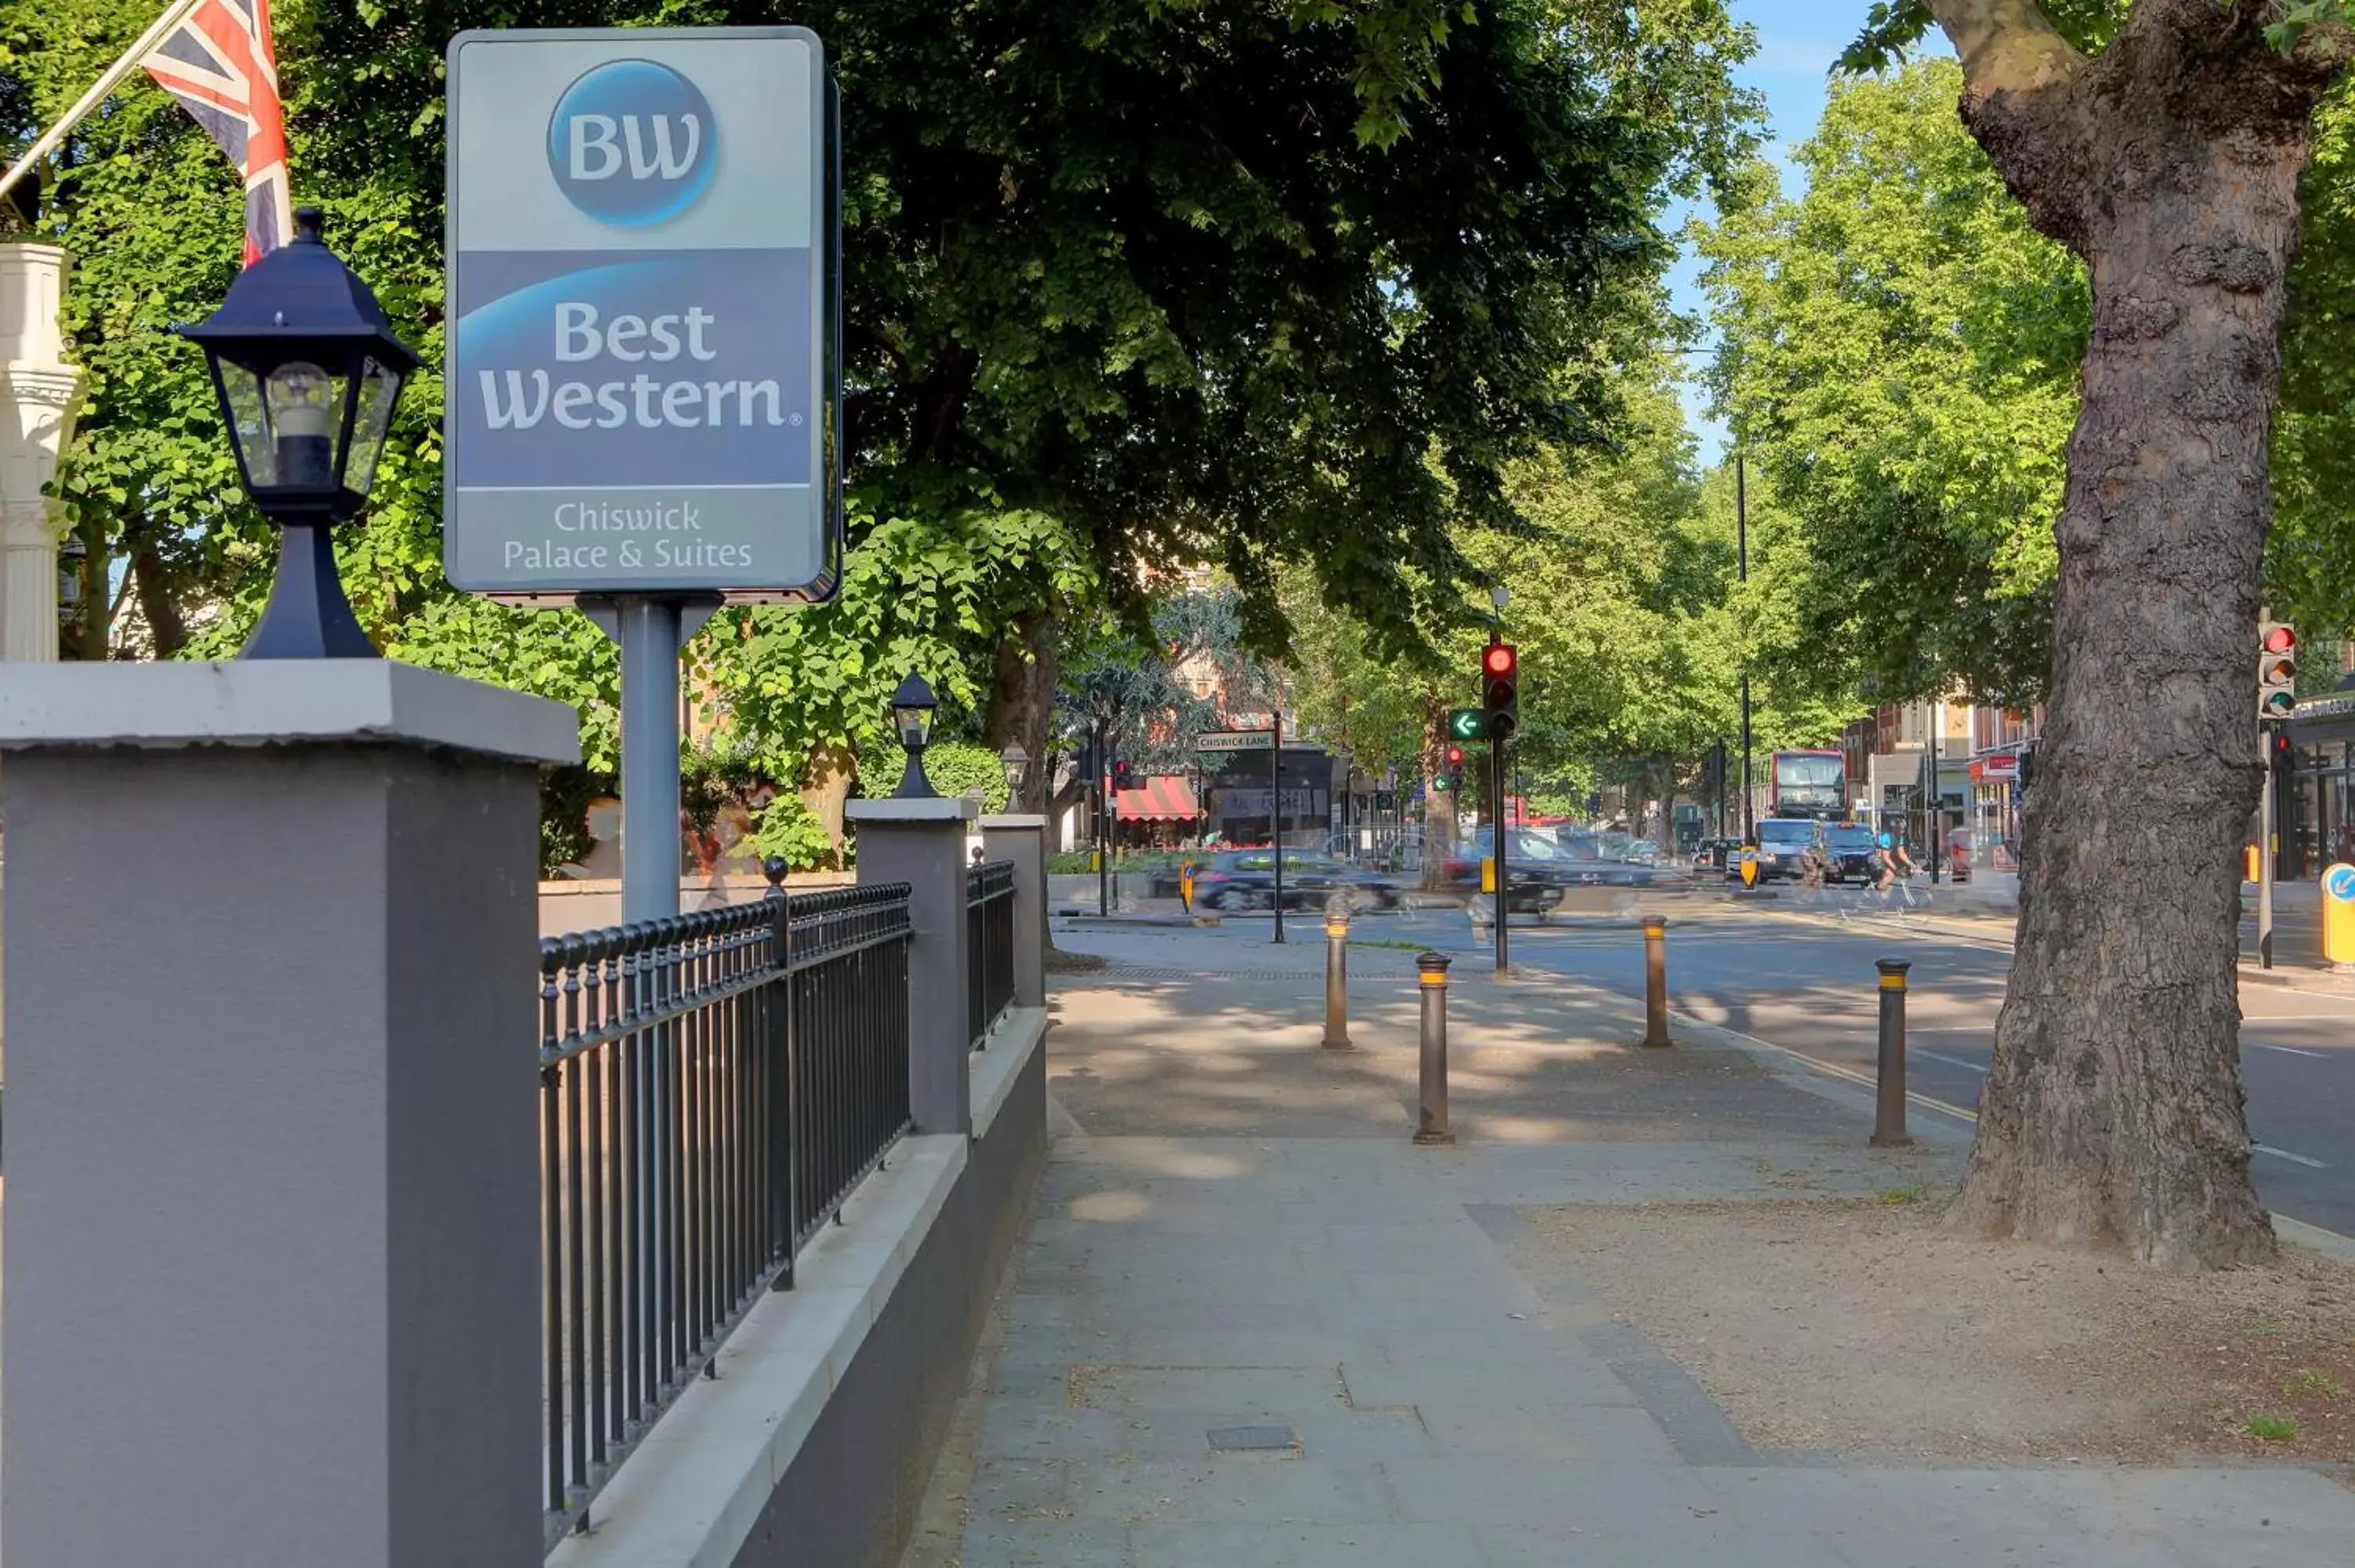 Property building in Best Western Chiswick Palace & Suites London